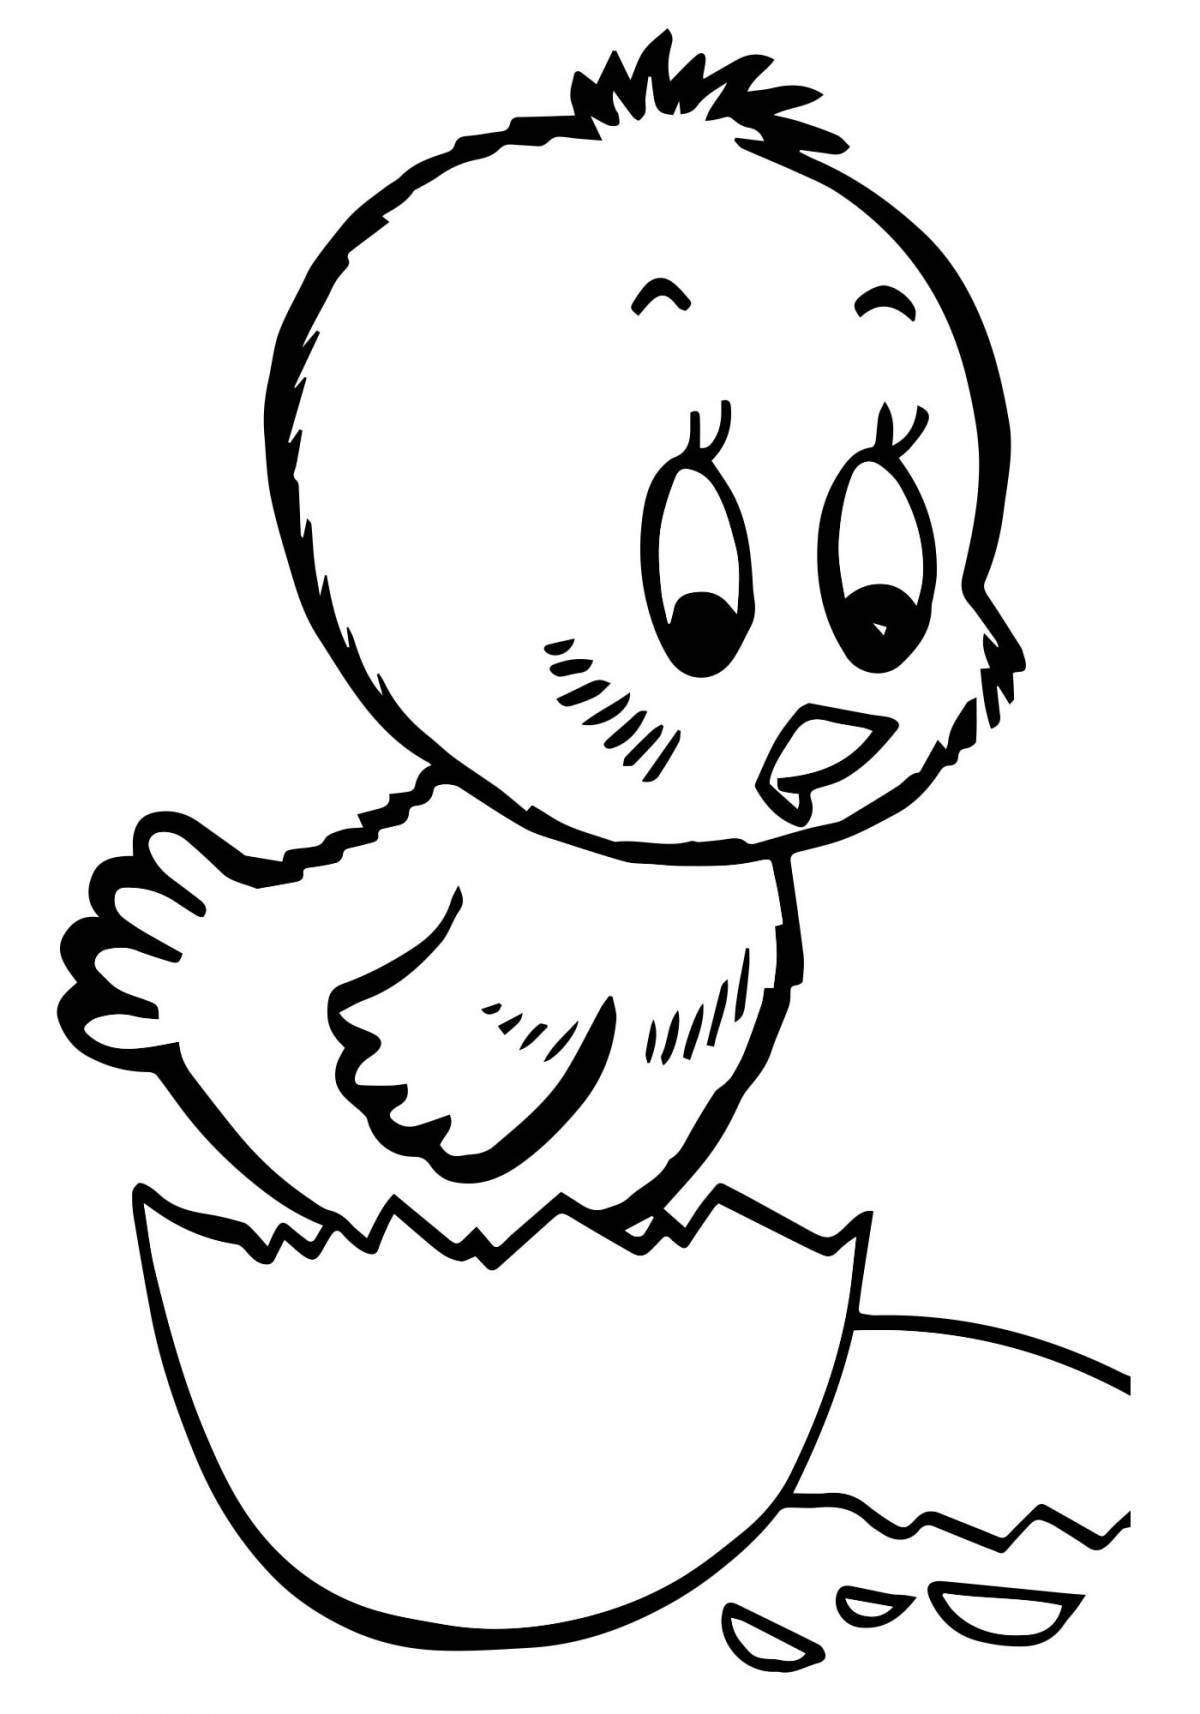 Coloring page playful chicken in shell